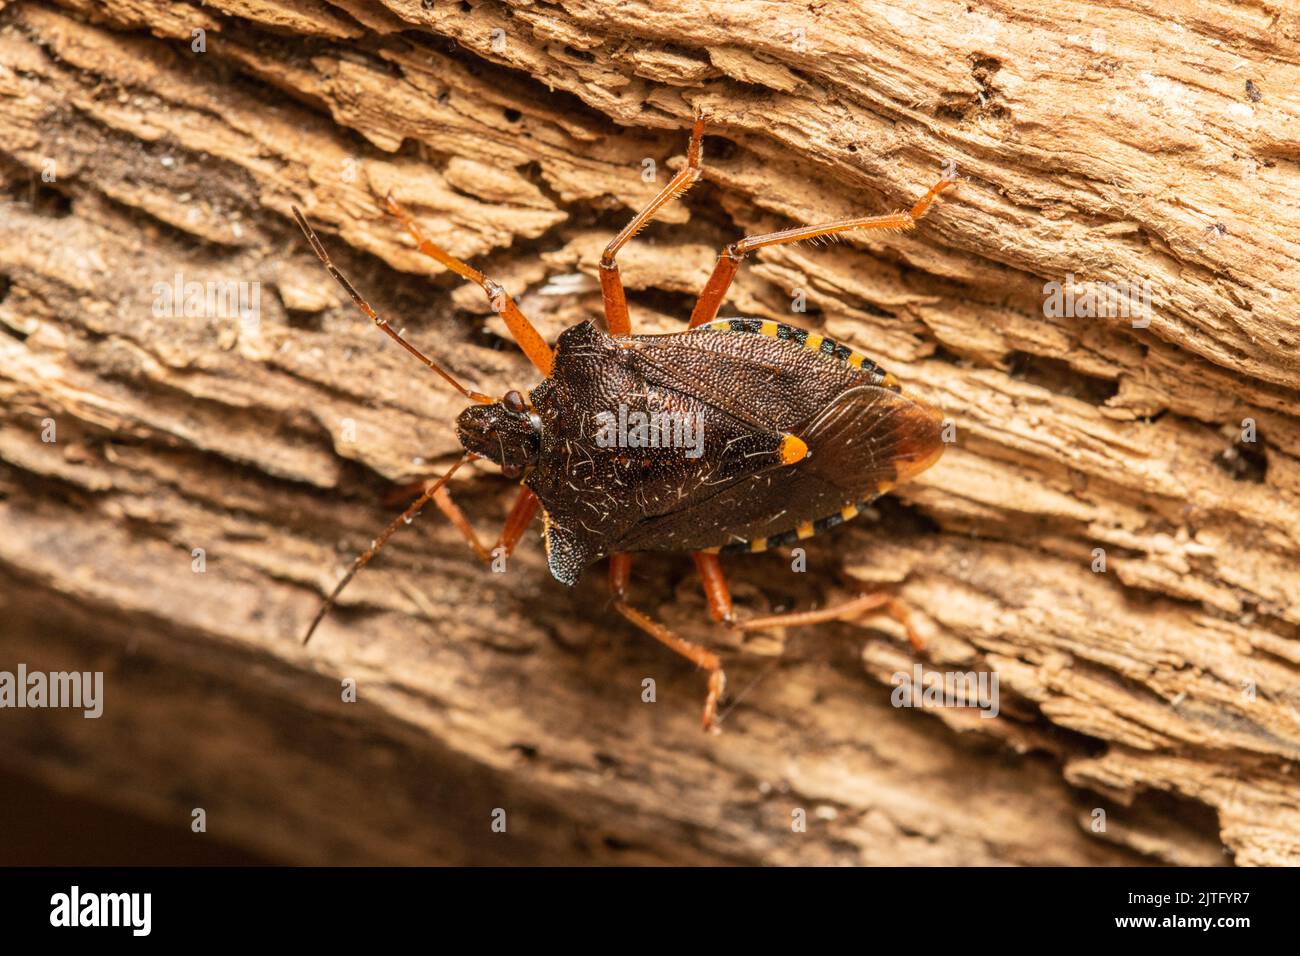 A forest bug also known as red-legged shieldbug, Pentatoma rufipes, perched on a rotten log. Stock Photo